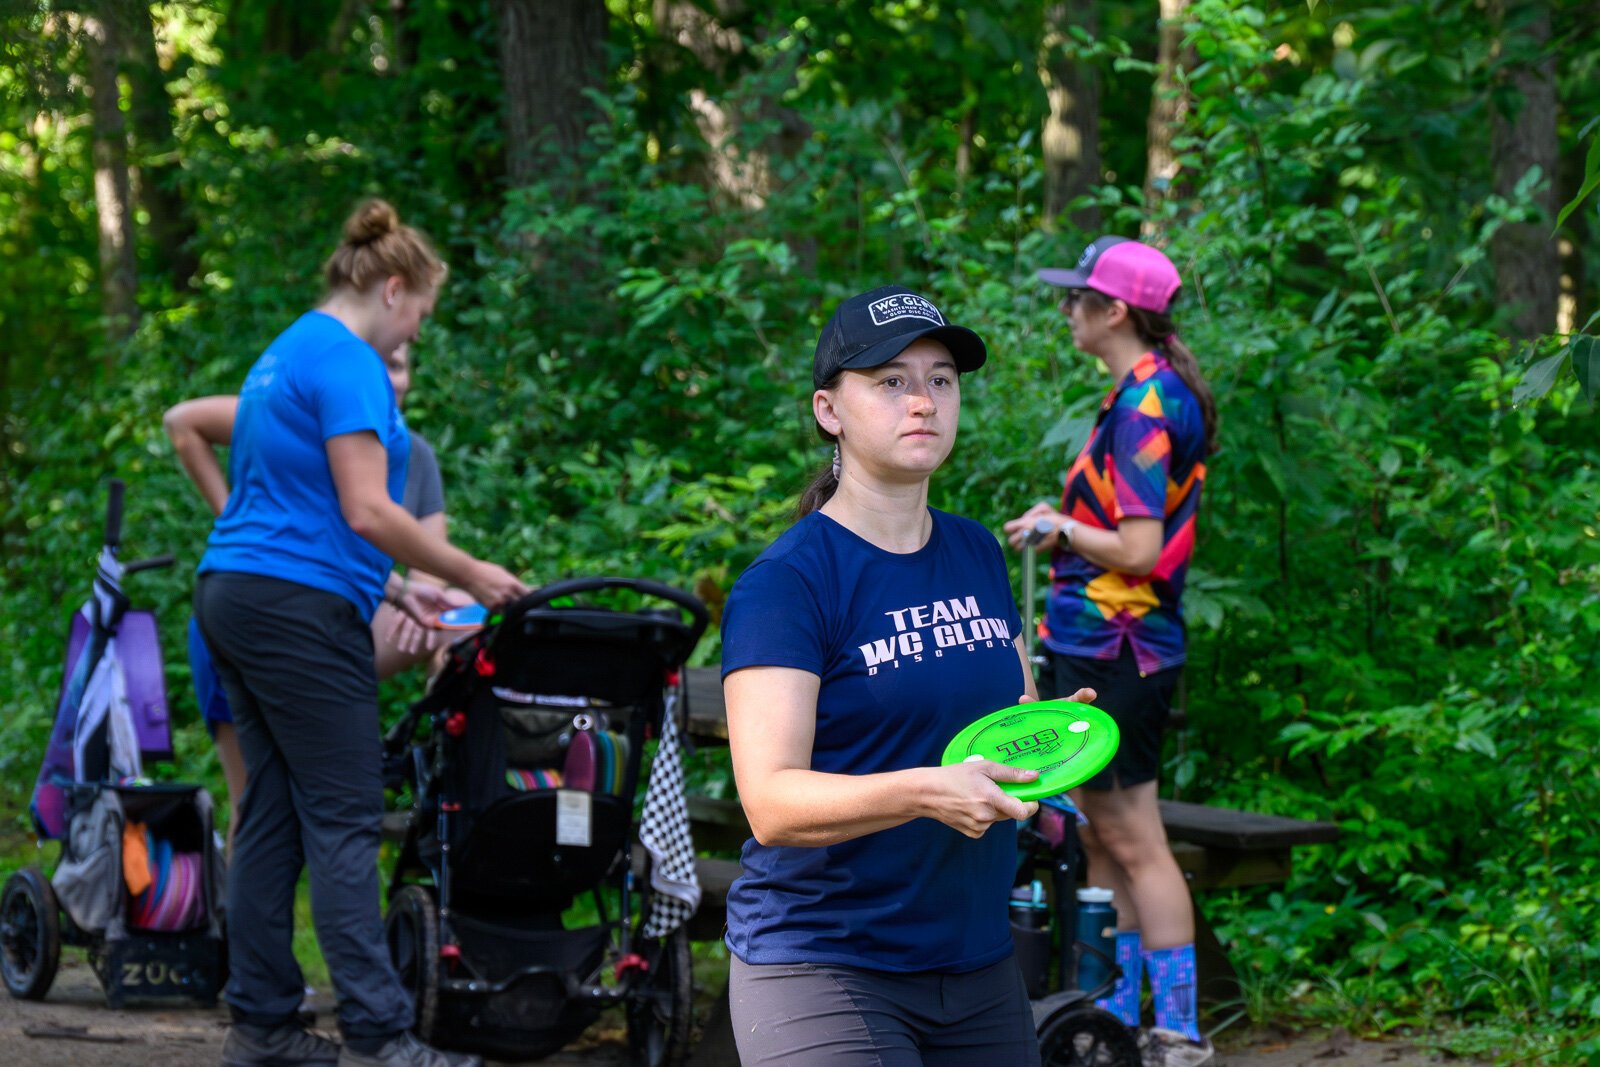 Jennifer Trombley and friends playing at Red Hawk Disc Golf Course at Independence Lake County Park.